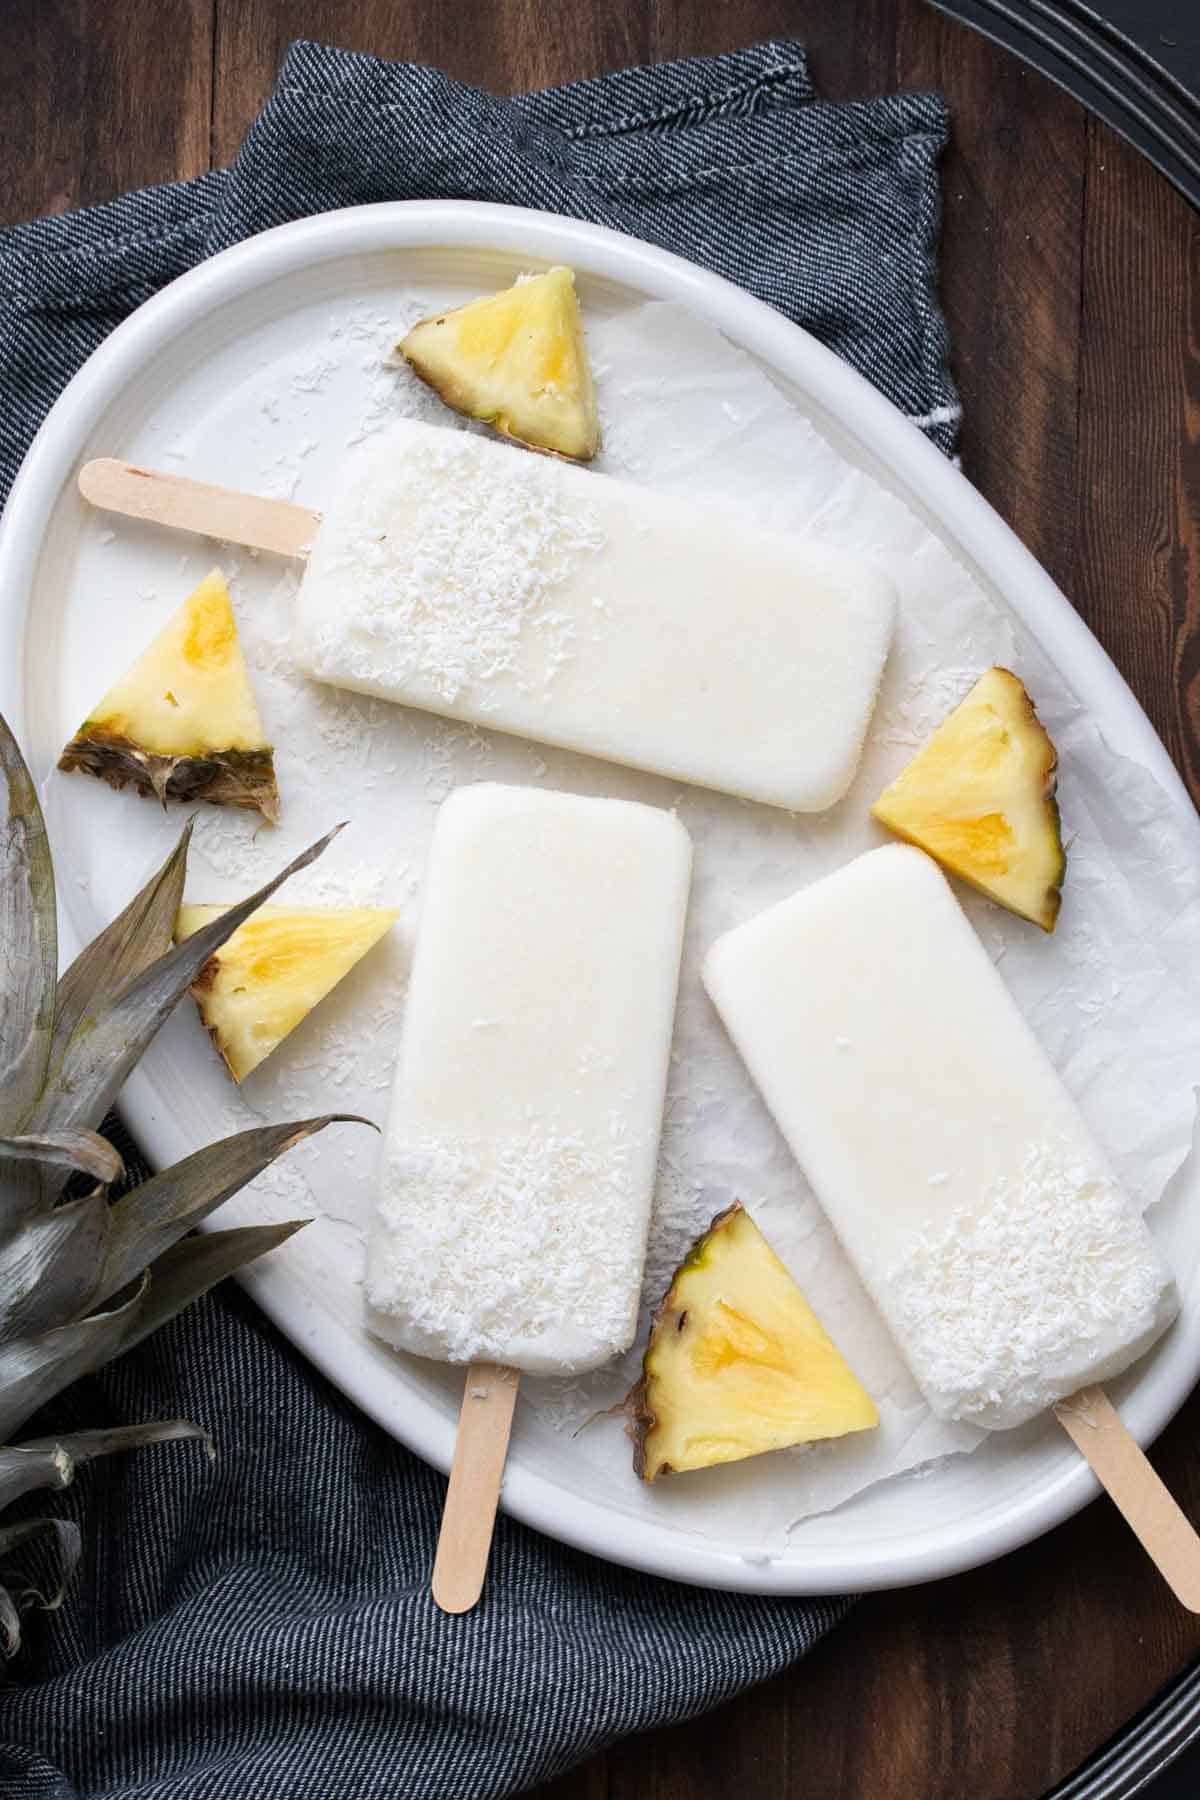 White platter of creamy looking popsicles next to pieces of pineapple